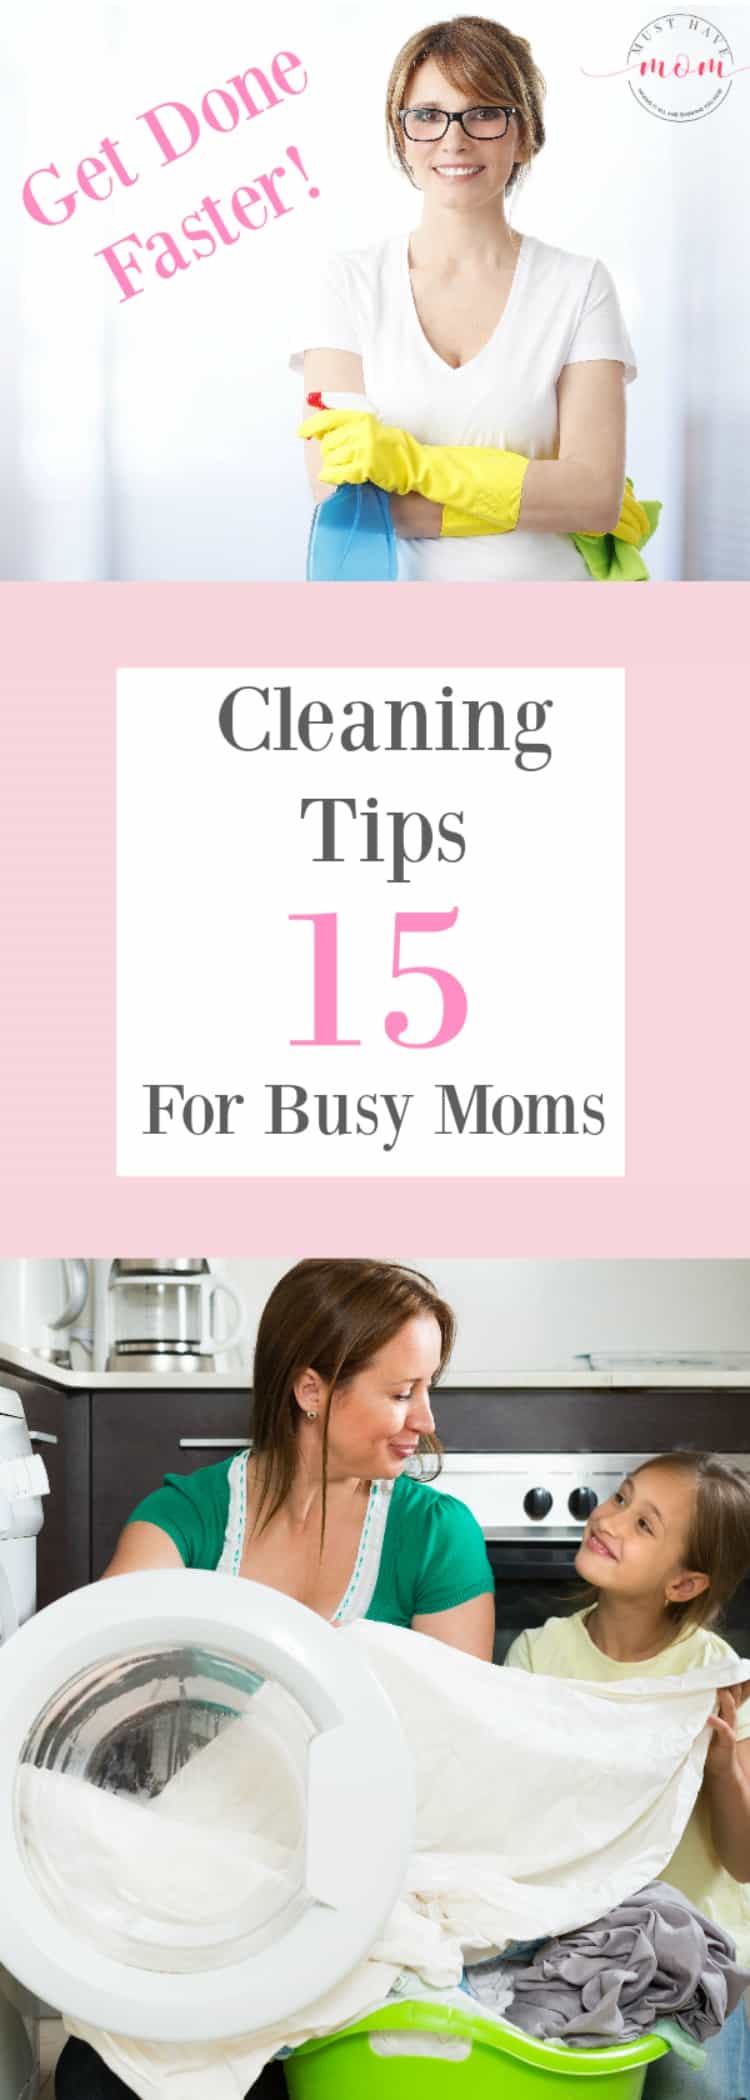 15 Cleaning Tips for Busy Moms! Get your cleaning done faster and keep your house tidy with less effort. Plus free printable cleaning schedule!